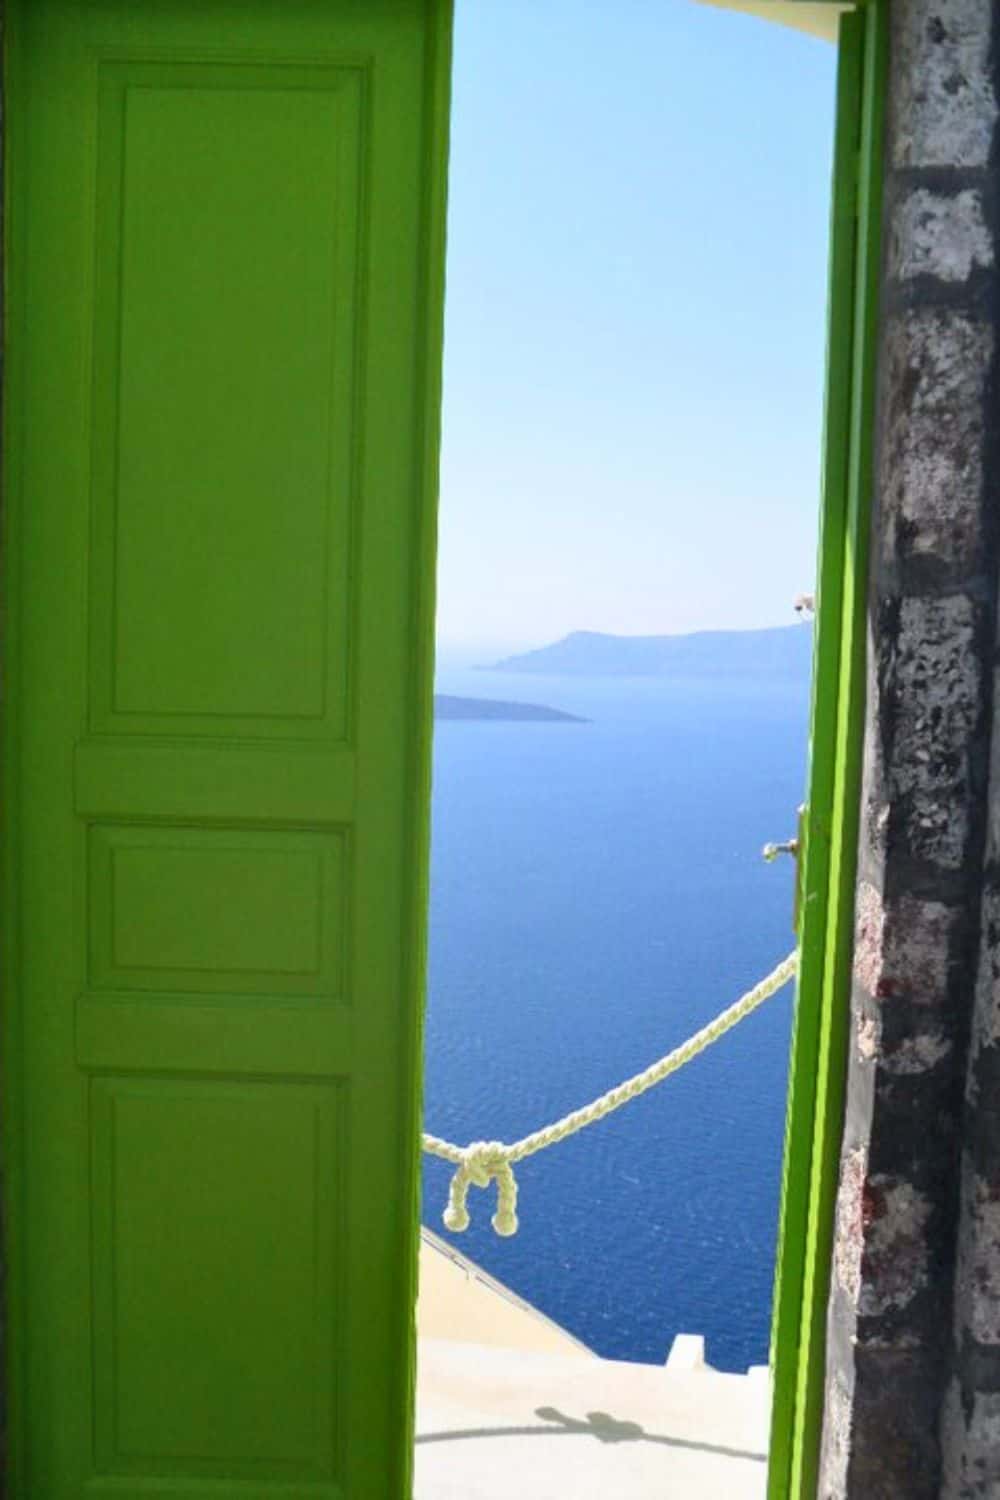 A vivid green door opens to reveal a stunning view of the bright blue Aegean Sea, with a simple rope across the entrance suggesting an invitation to the serene seascape beyond.